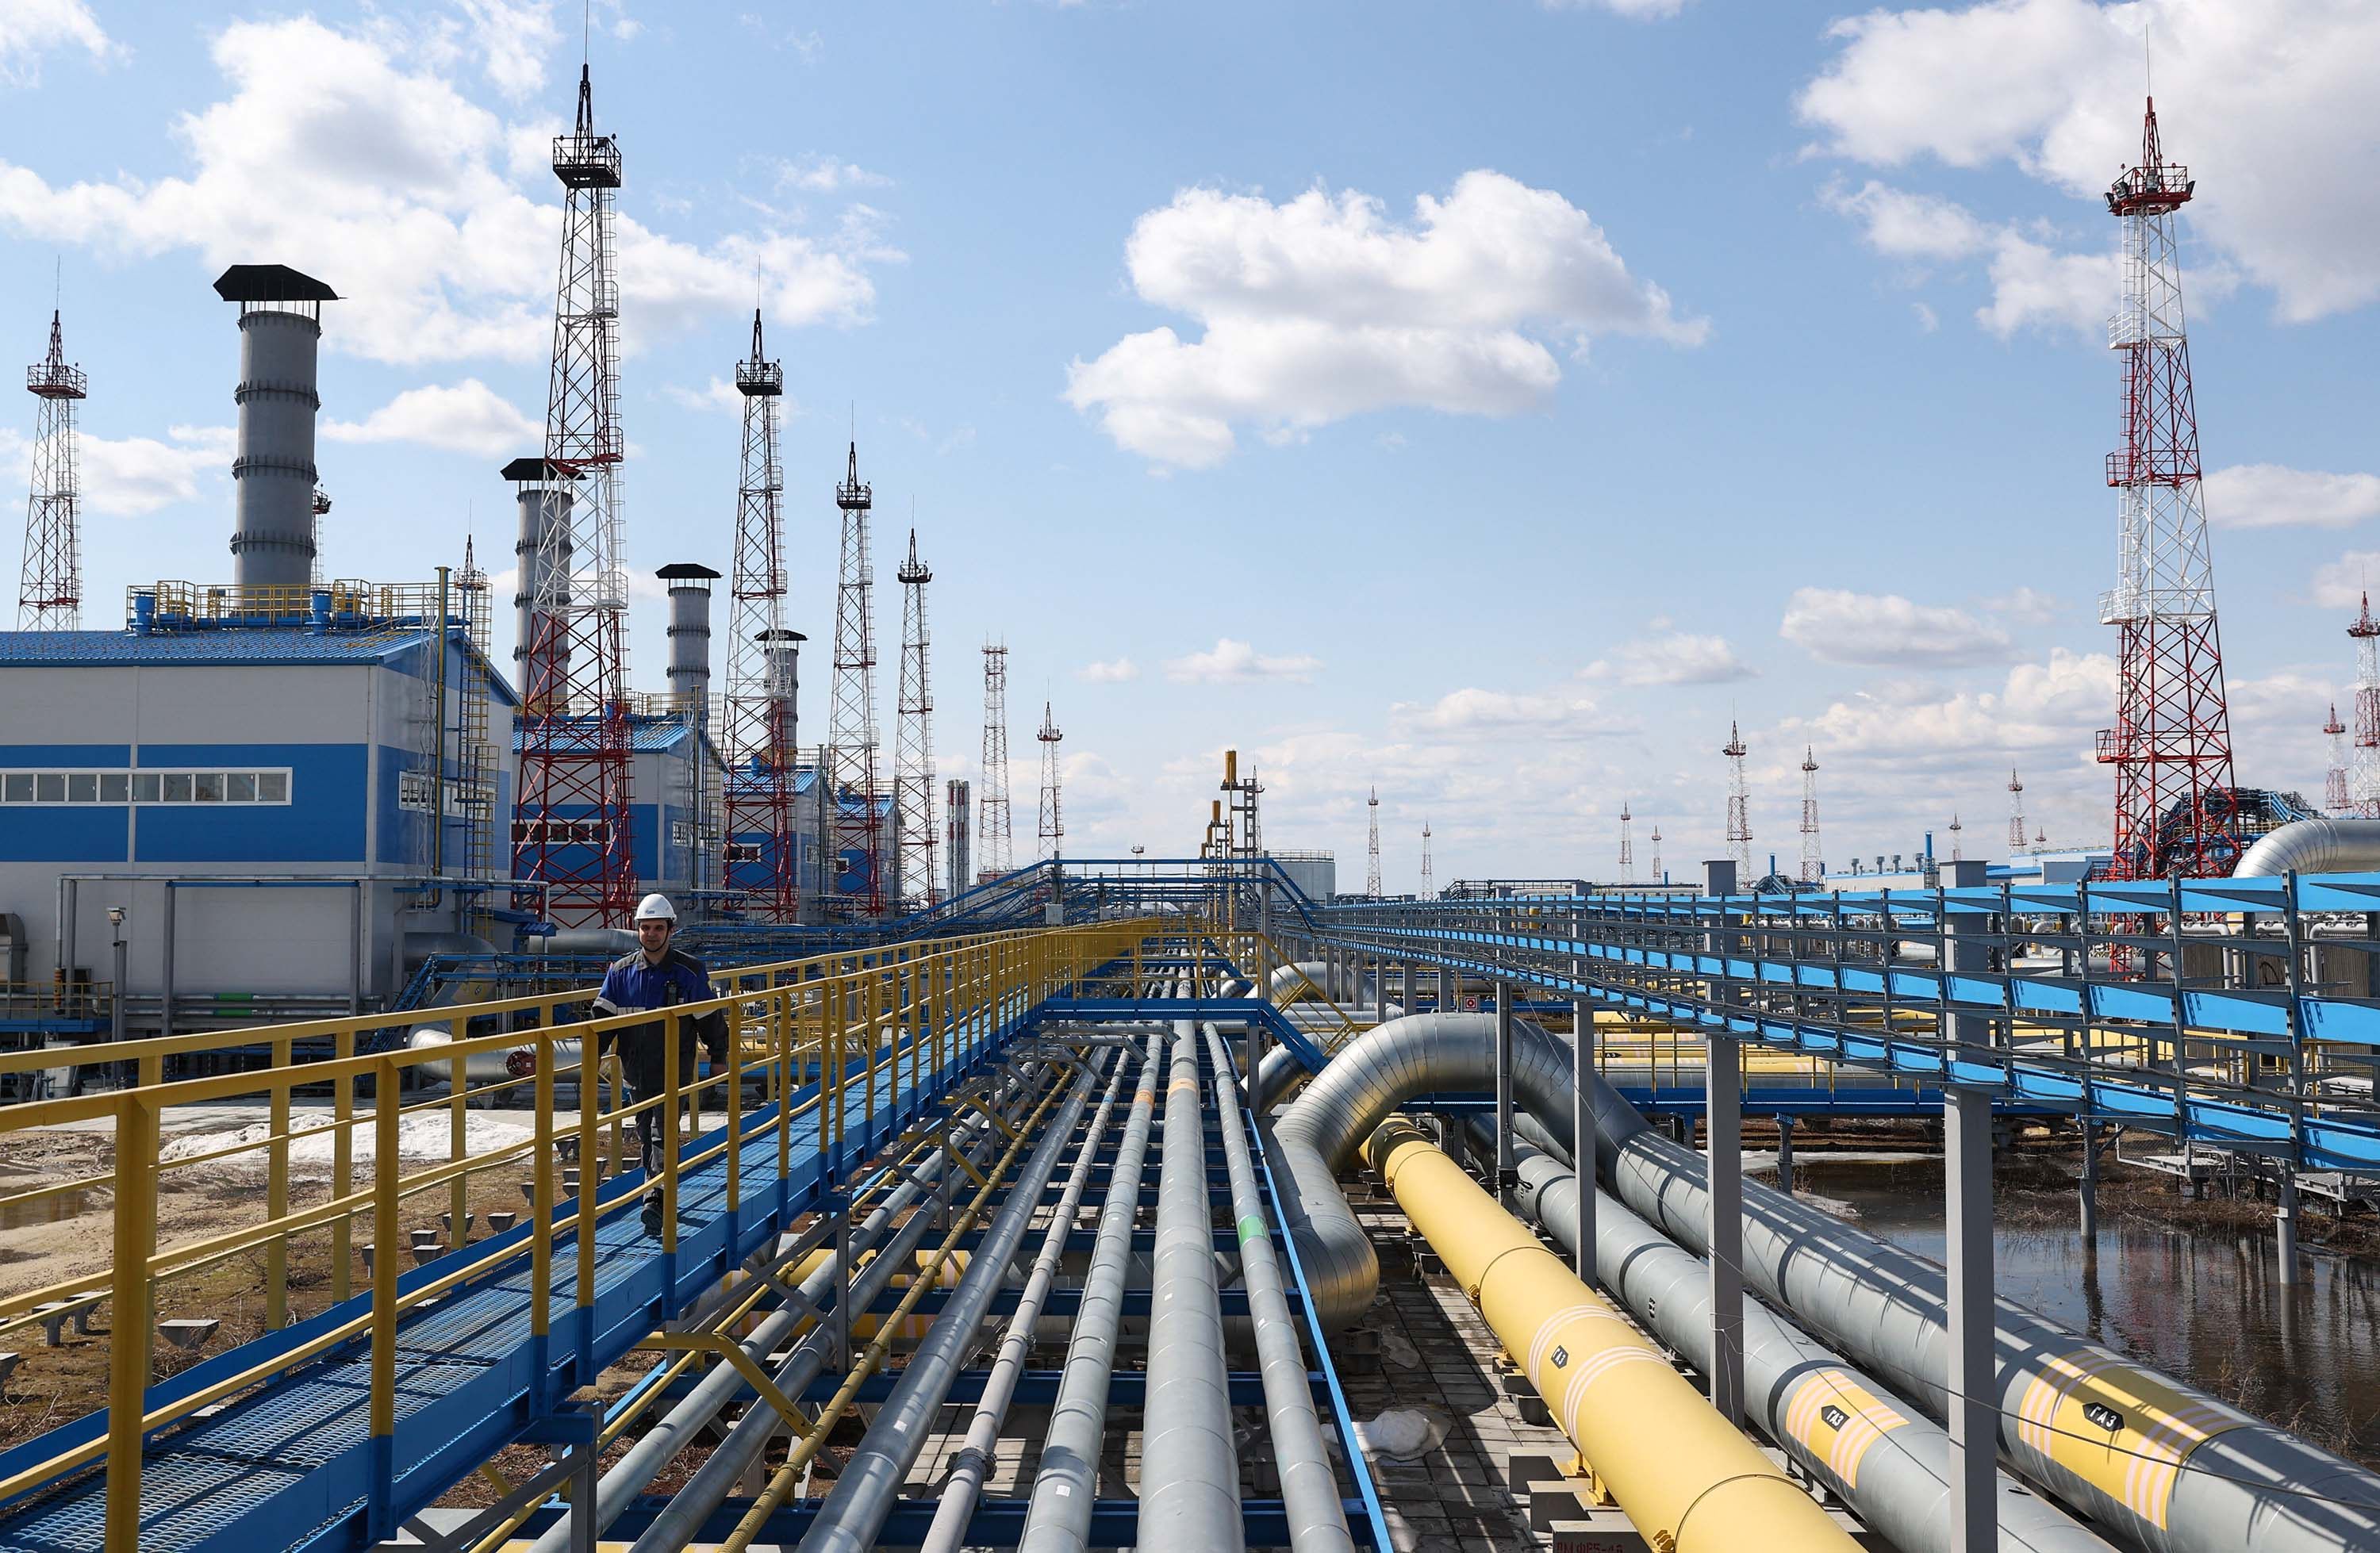 A Russian Gazprom gas treatment facility in Tatarstan that is a resource base for a pipeline. Photo: TNS